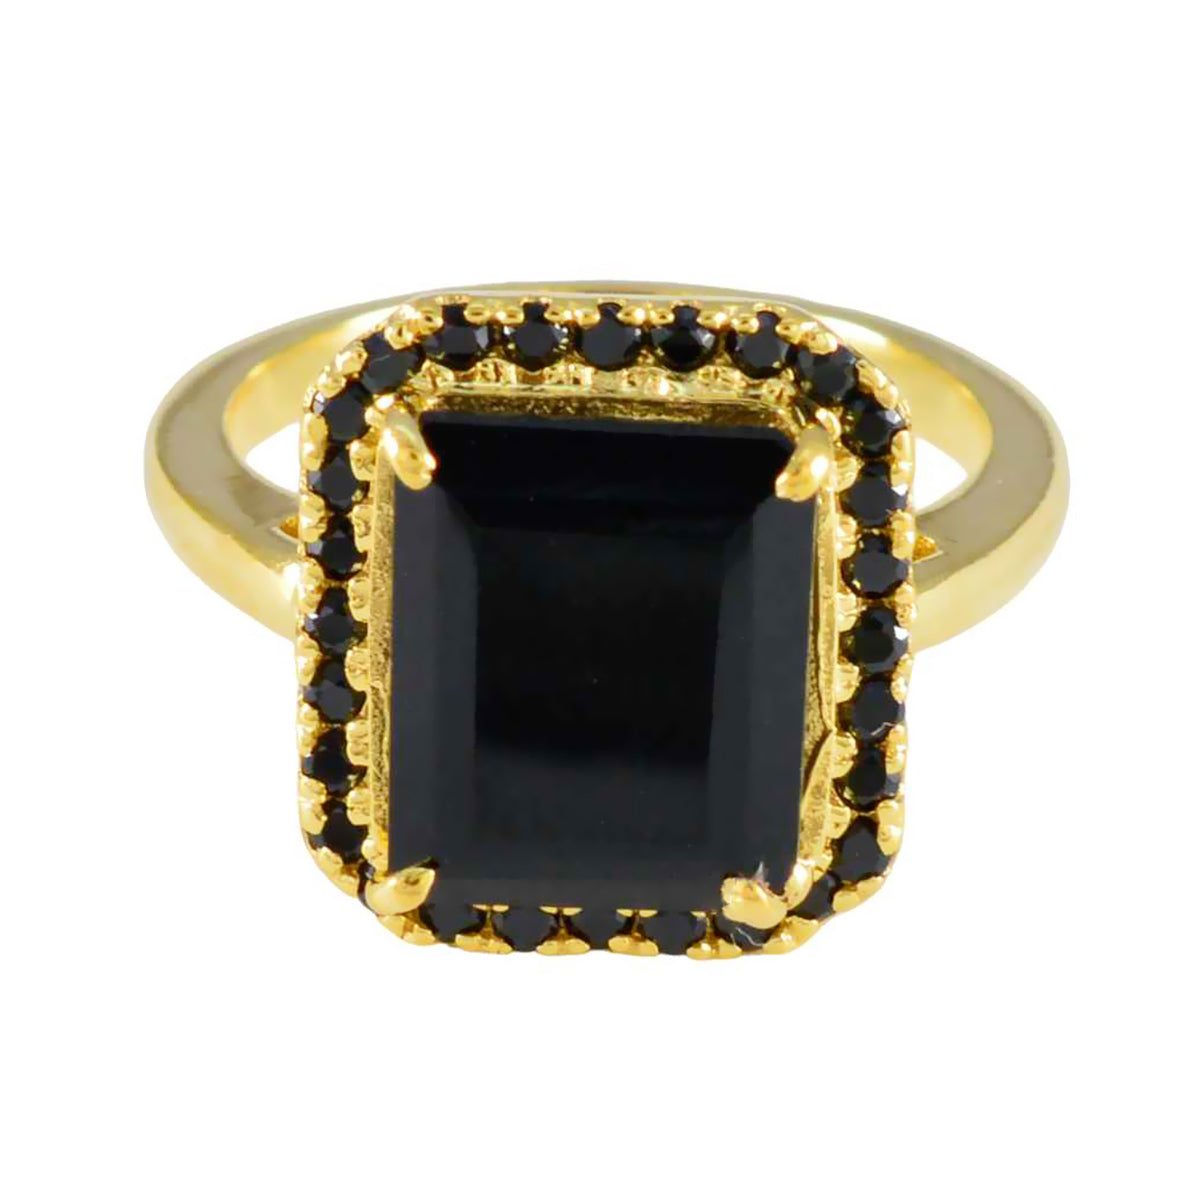 Riyo Gorgeous Silver Ring With Yellow Gold Plating Black Onyx Stone Octagon Shape Prong Setting Antique Jewelry Easter Ring